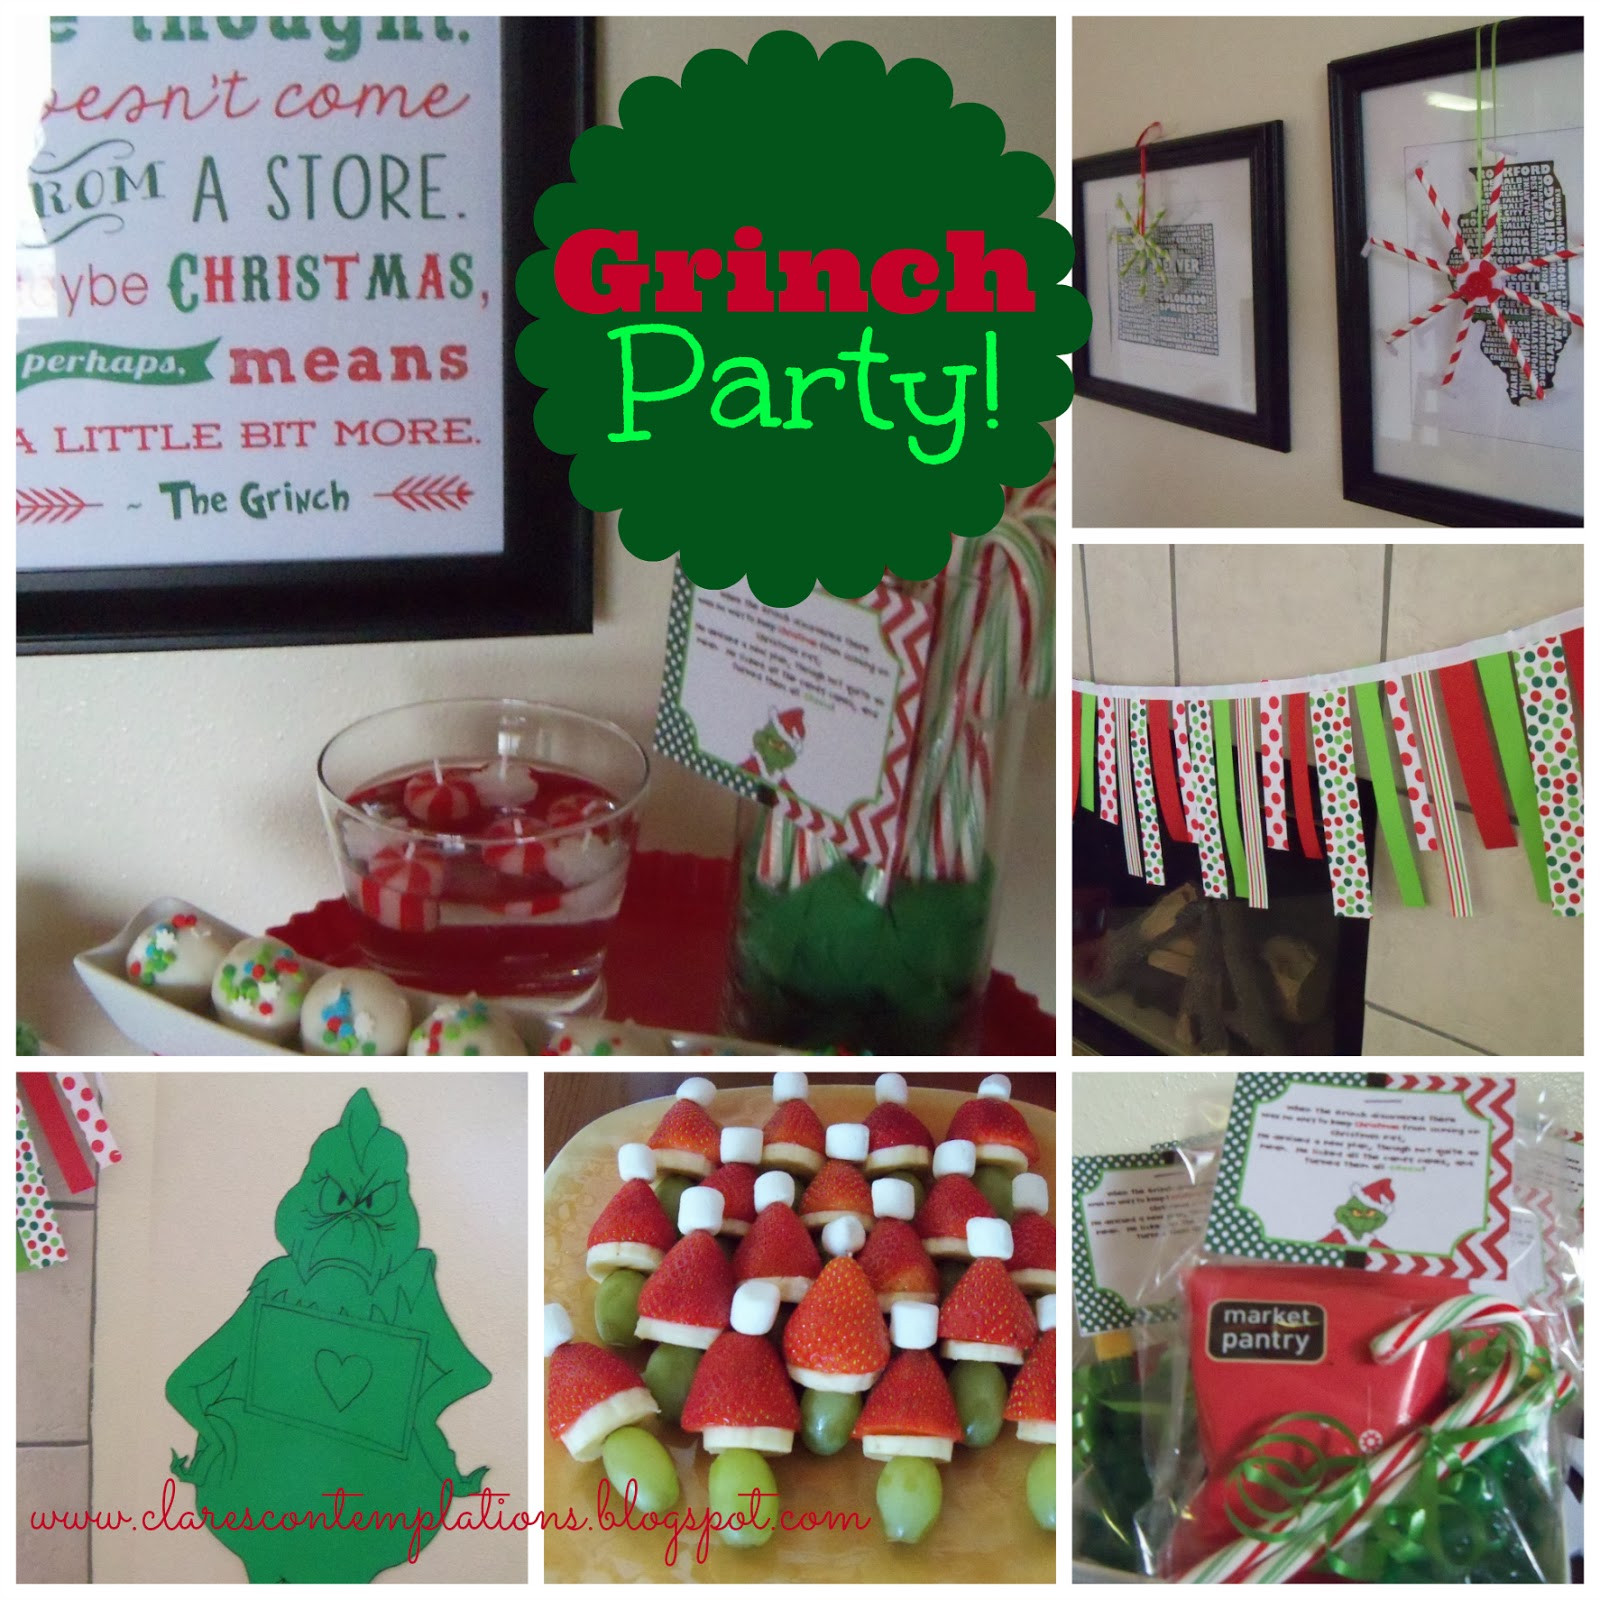 Grinch Christmas Party Ideas
 Clare s Contemplations Great Grinch Party